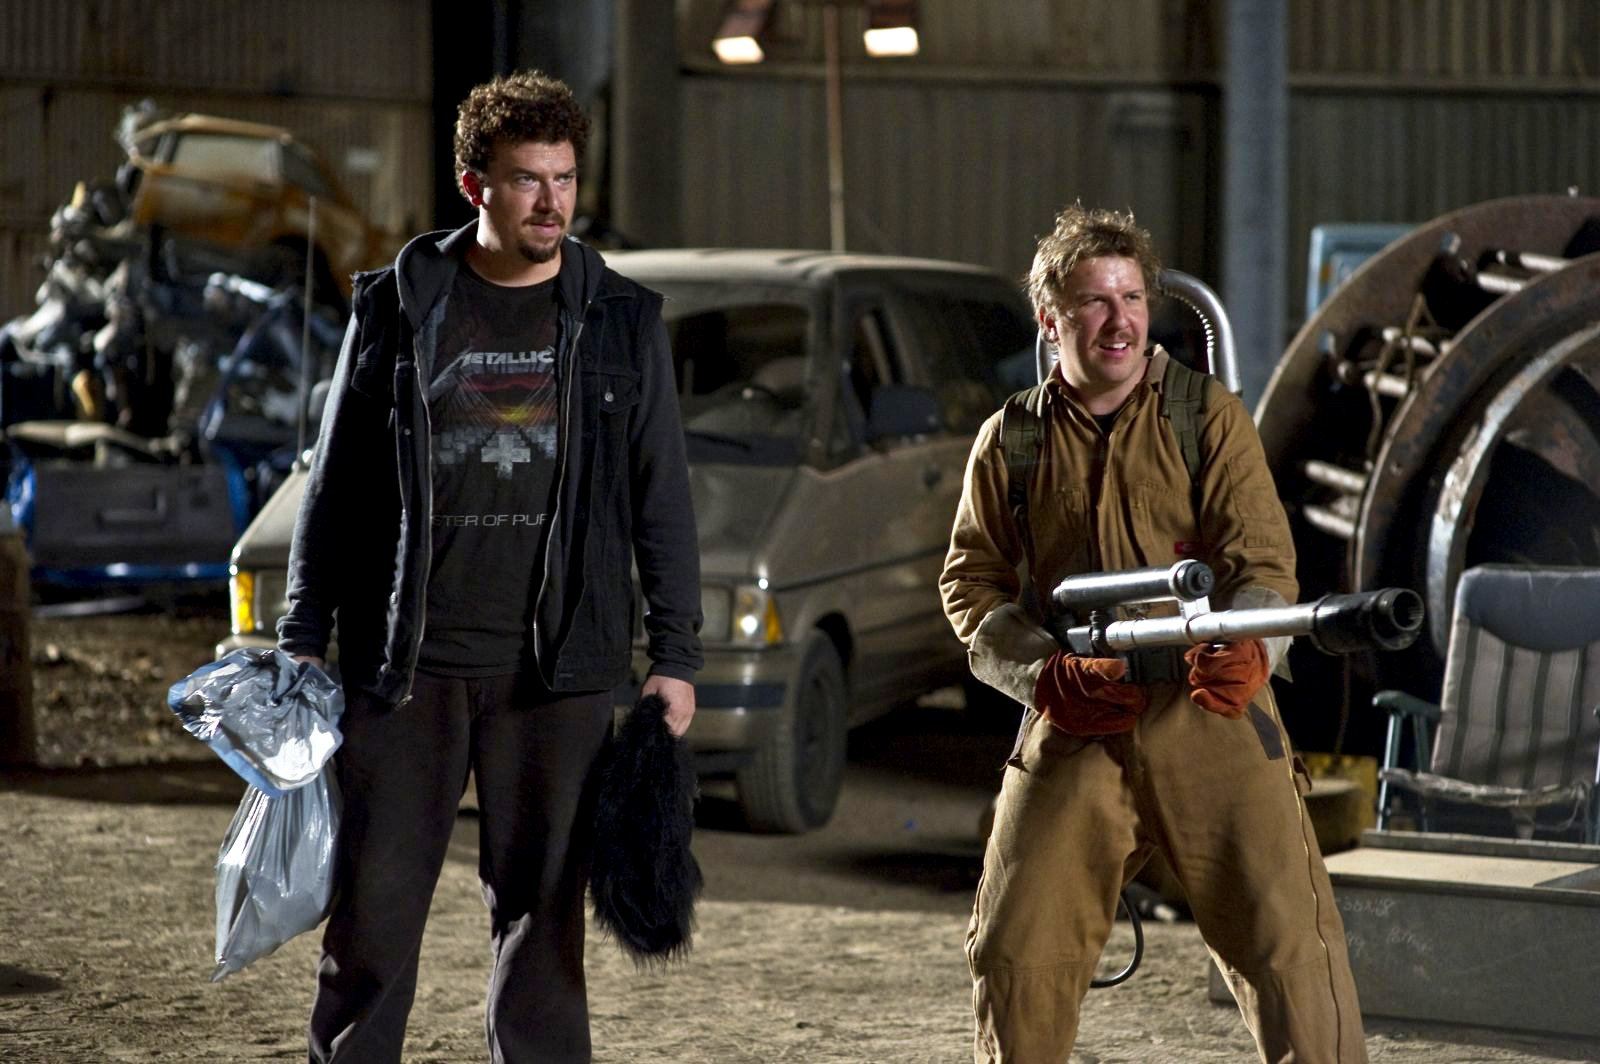 Danny McBride stars as Dwayne and Nick Swardson stars as Travis in Columbia Pictures' 30 Minutes or Less (2011). Photo by: Wilson Webb.